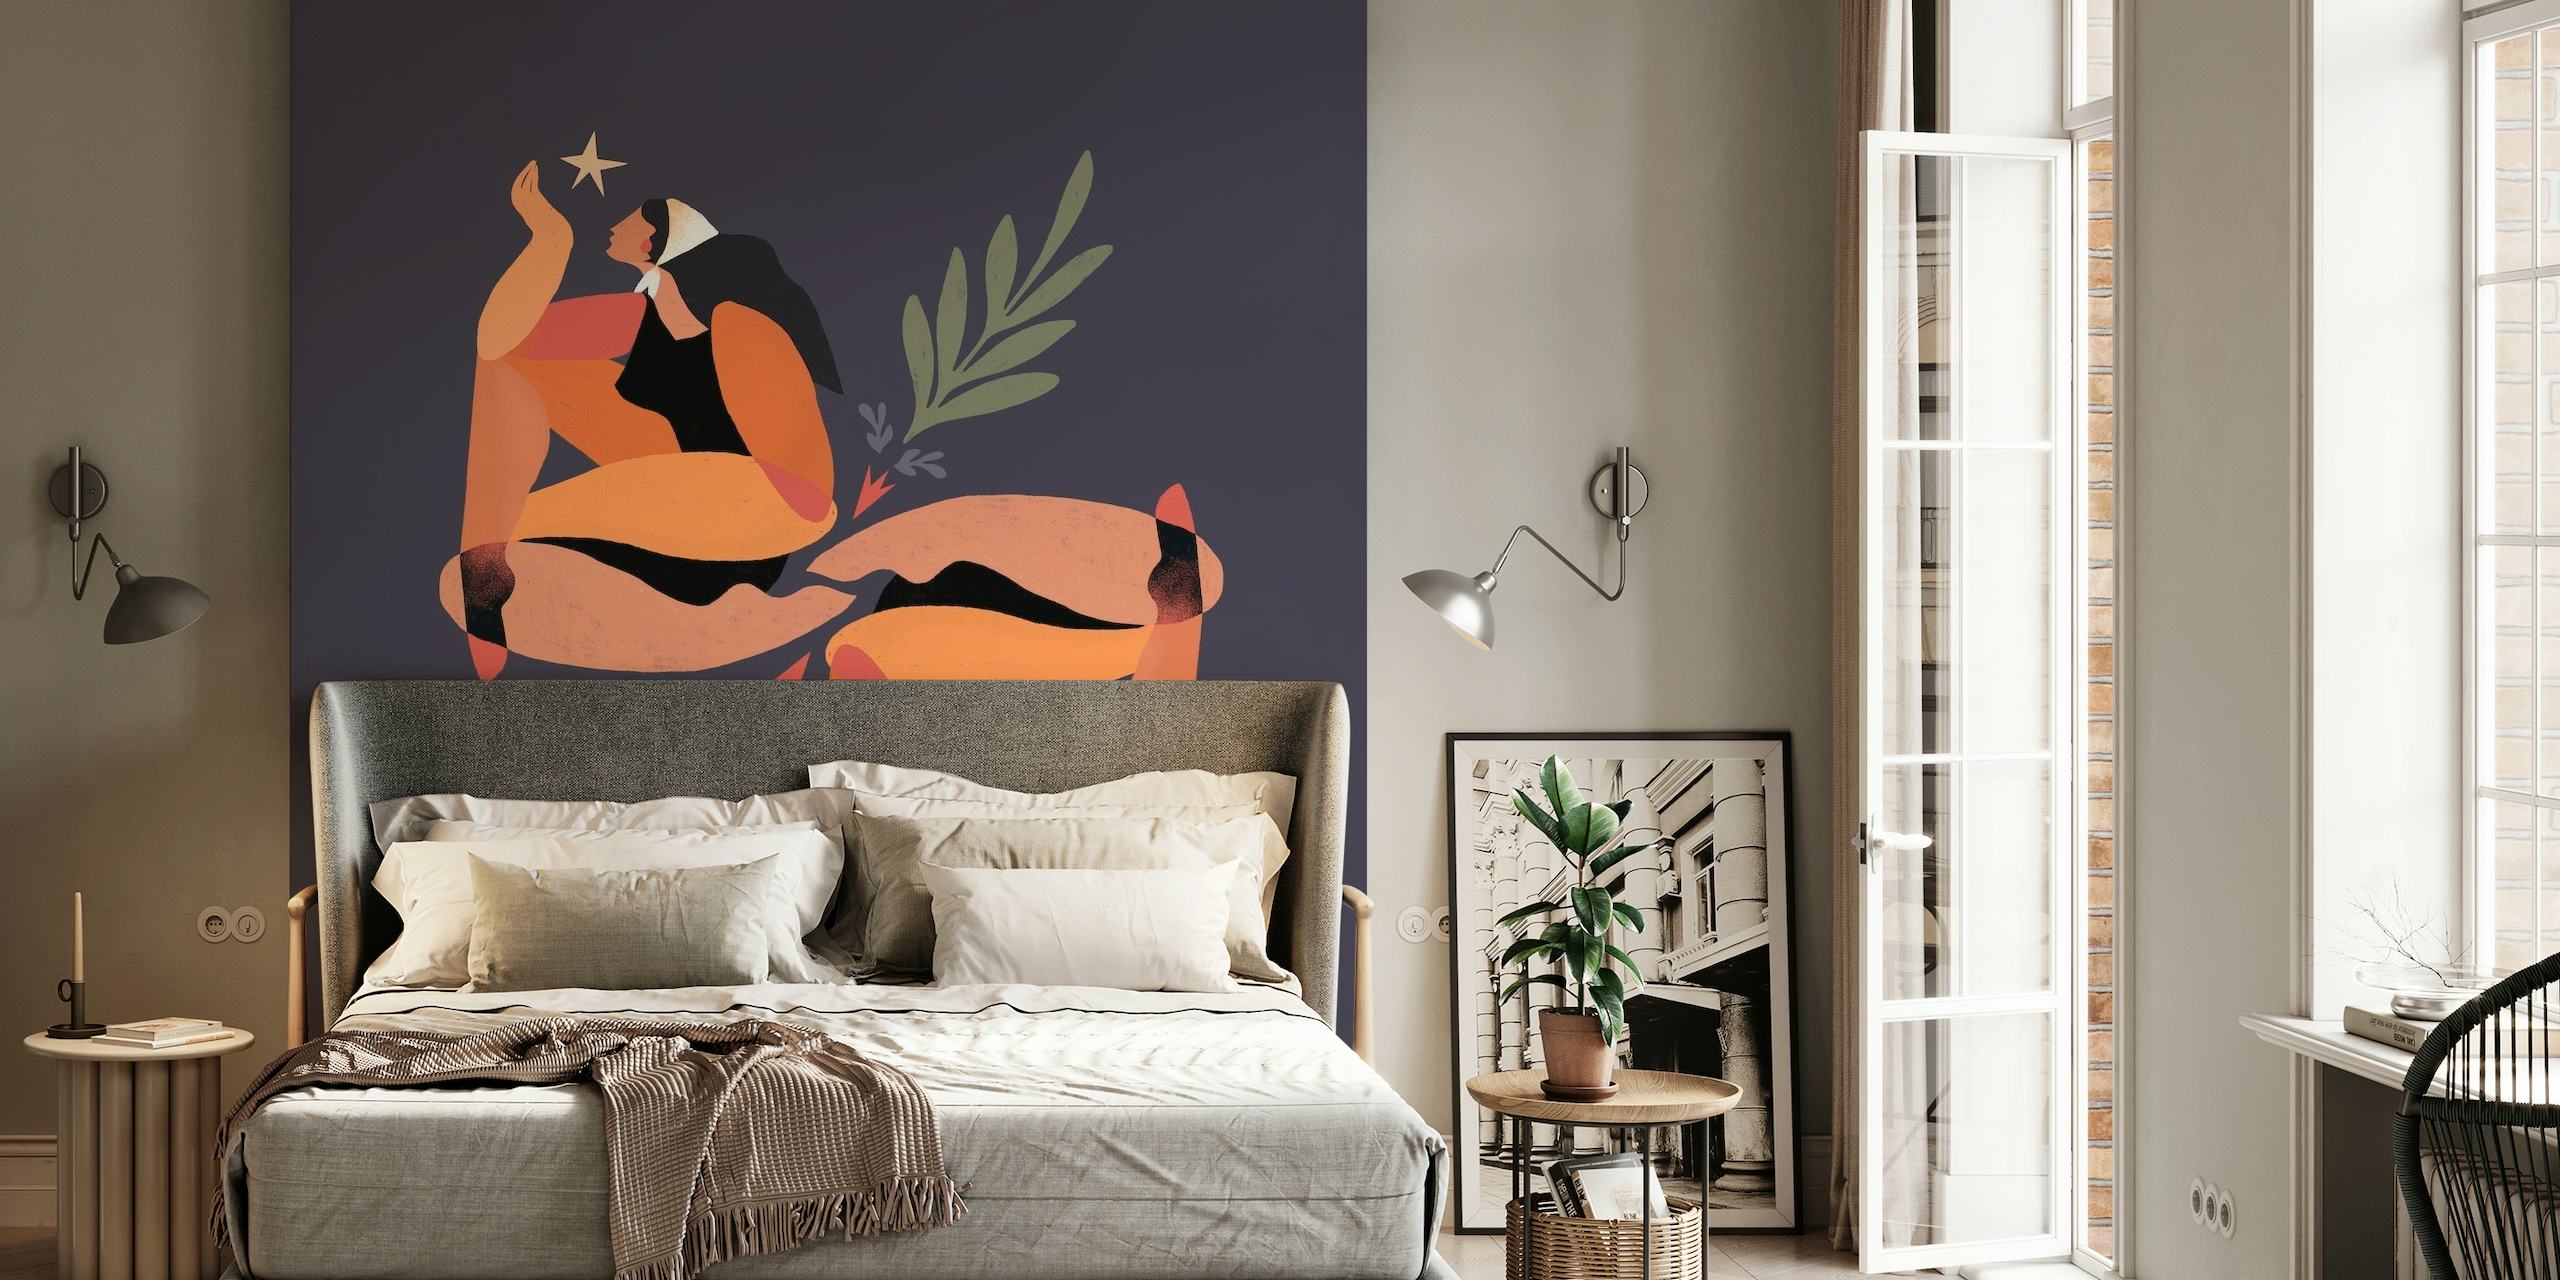 Abstract wall mural of a woman intertwined with botanical elements in earthy tones